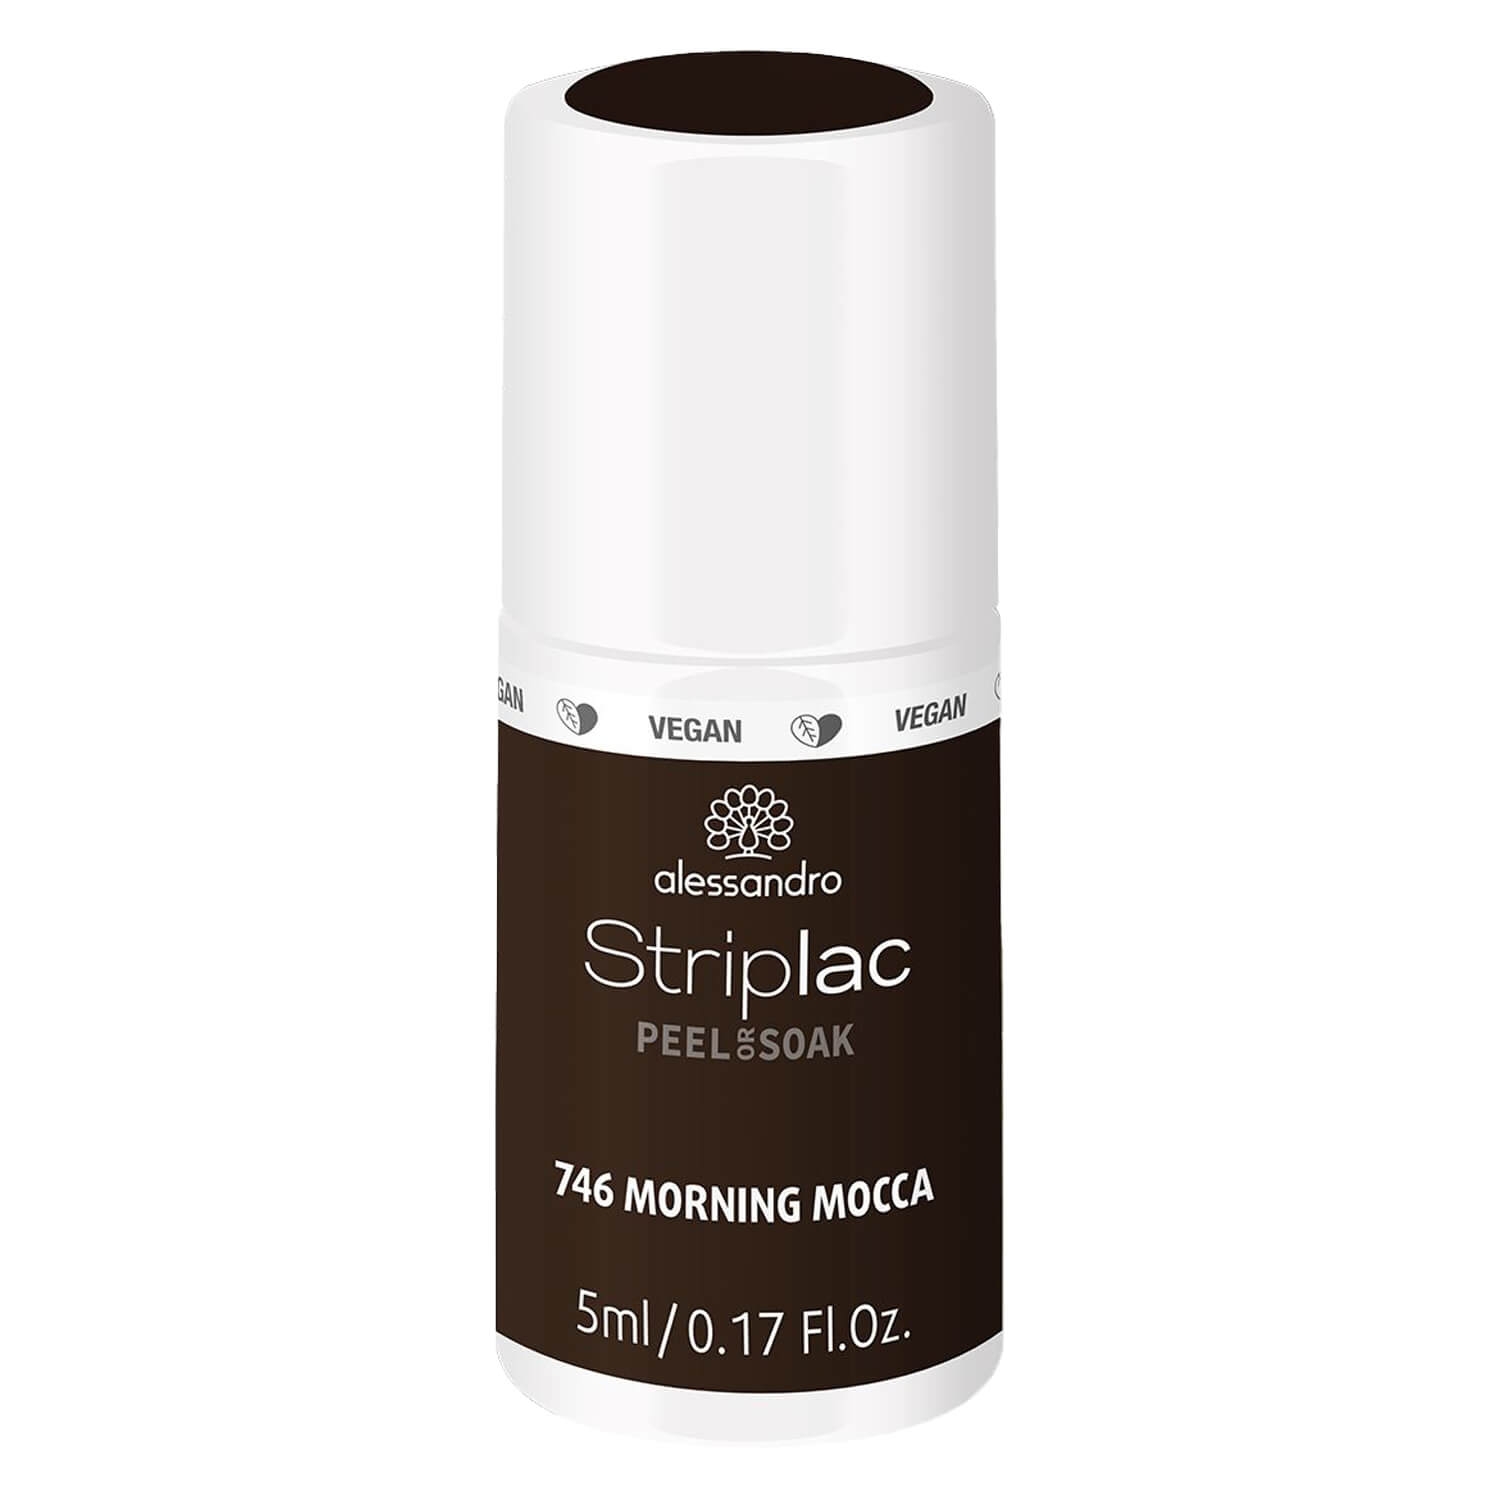 Product image from Striplac Peel or Soak 746 Morning Mocca